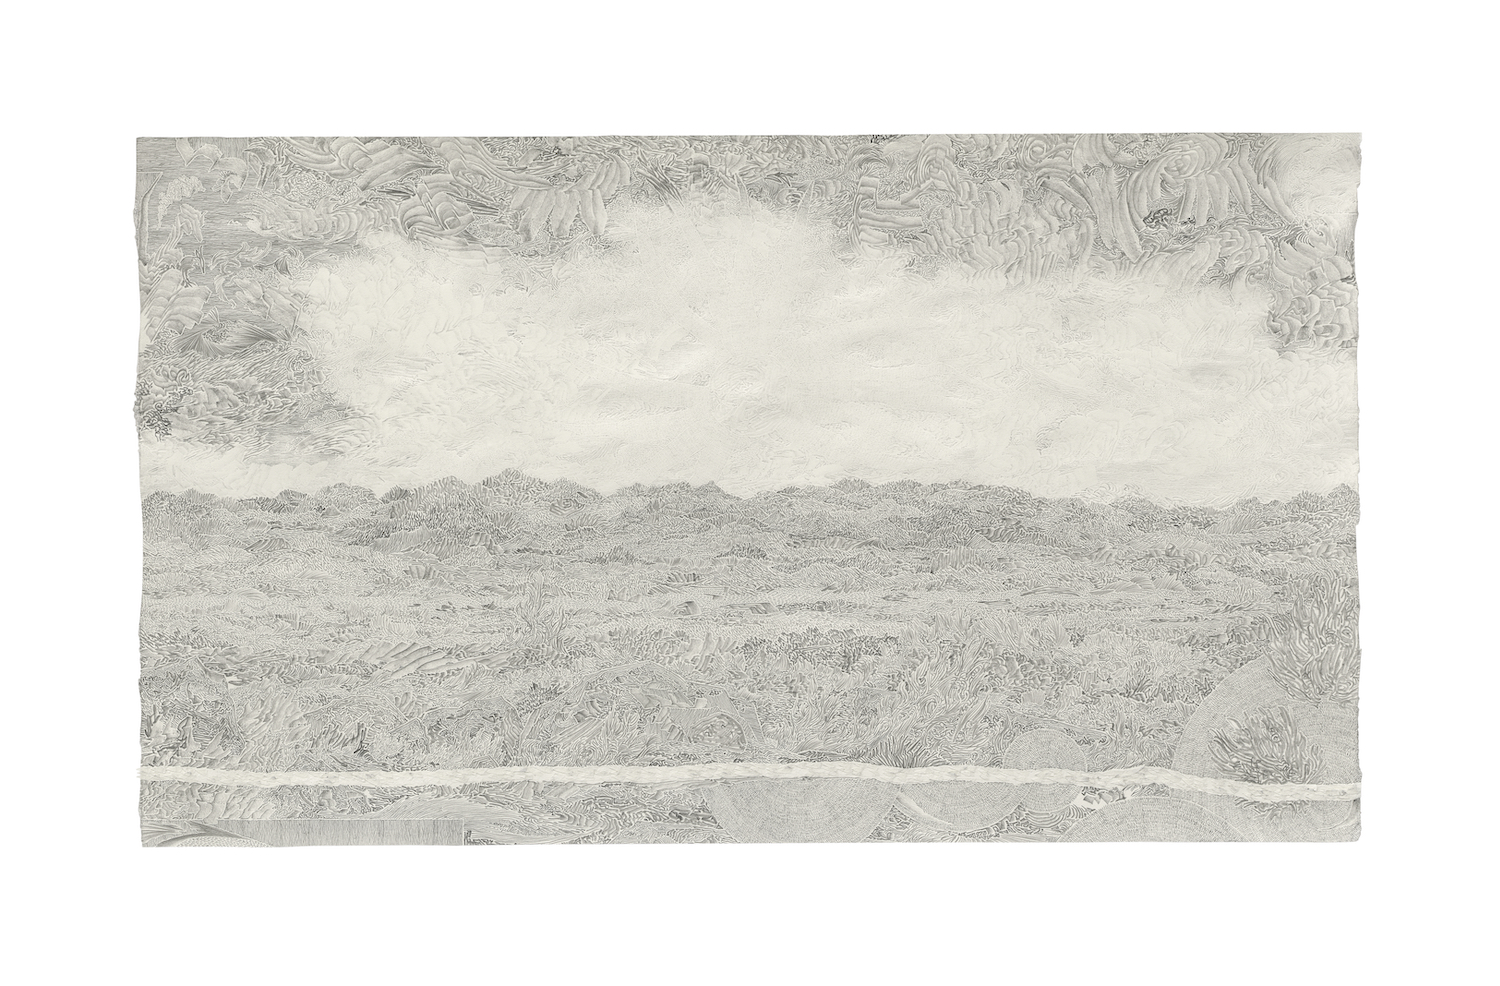 Fabrice Souvereyns  Untitled, 2021,pencil, eraser and collage on paper, 26.1 x 44.5 cm,frame 41x51cm